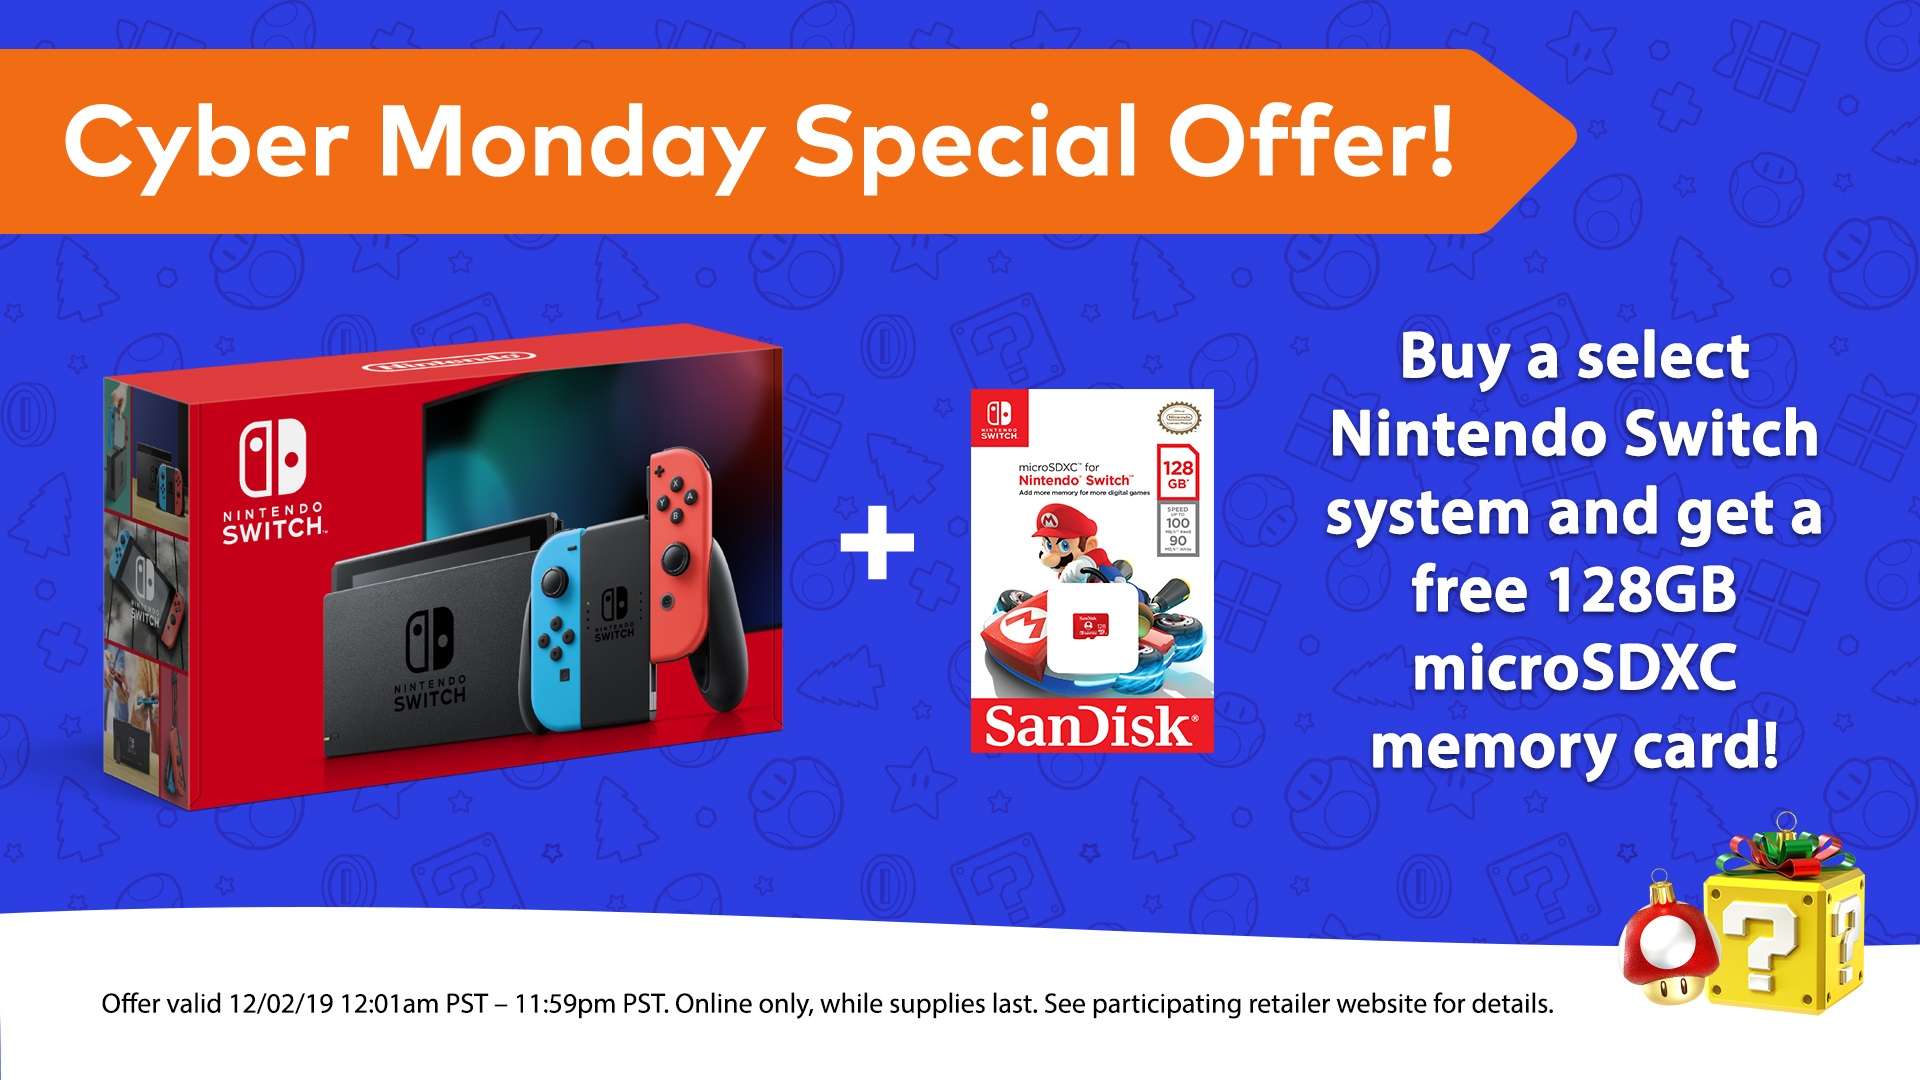 Purchase Nintendo Switch on Cyber Monday and Receive a Free 128GB microSD Card